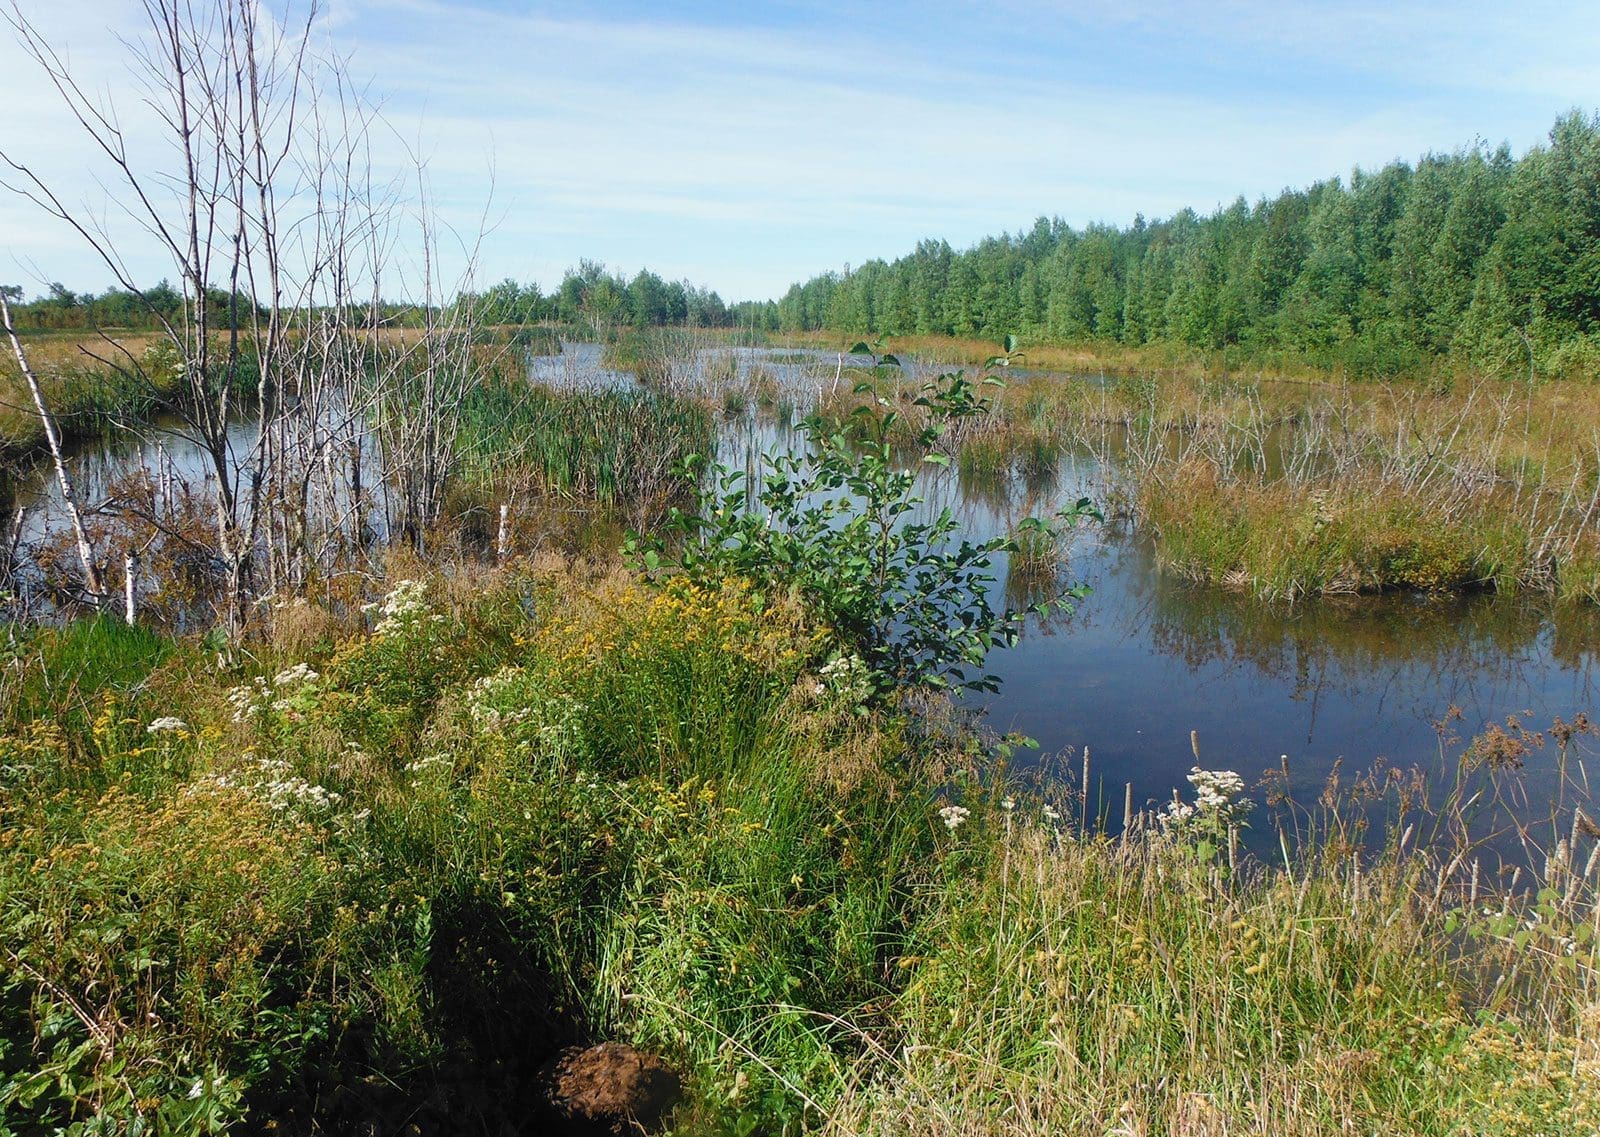 Protecting our home and native wetland